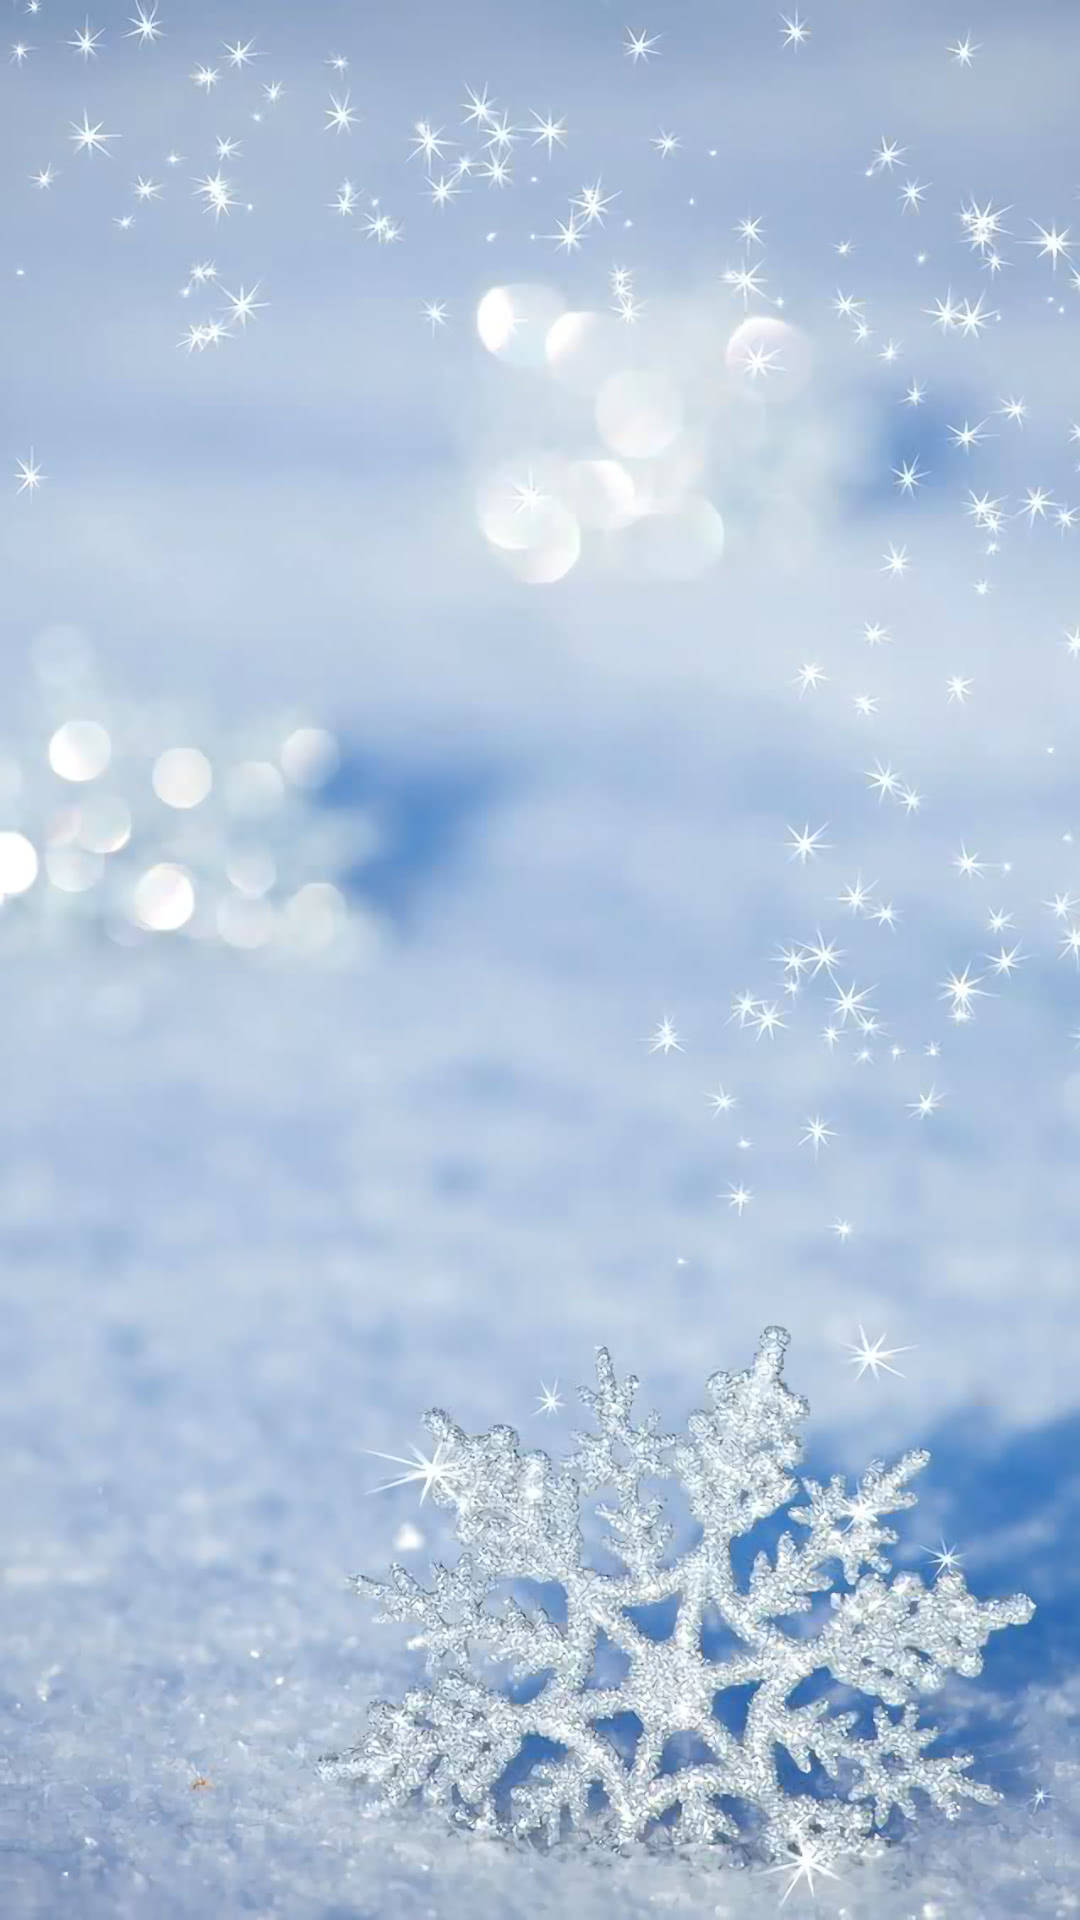 Winter Wonderland Perfectly Captured on New Snowflake Iphone Wallpaper